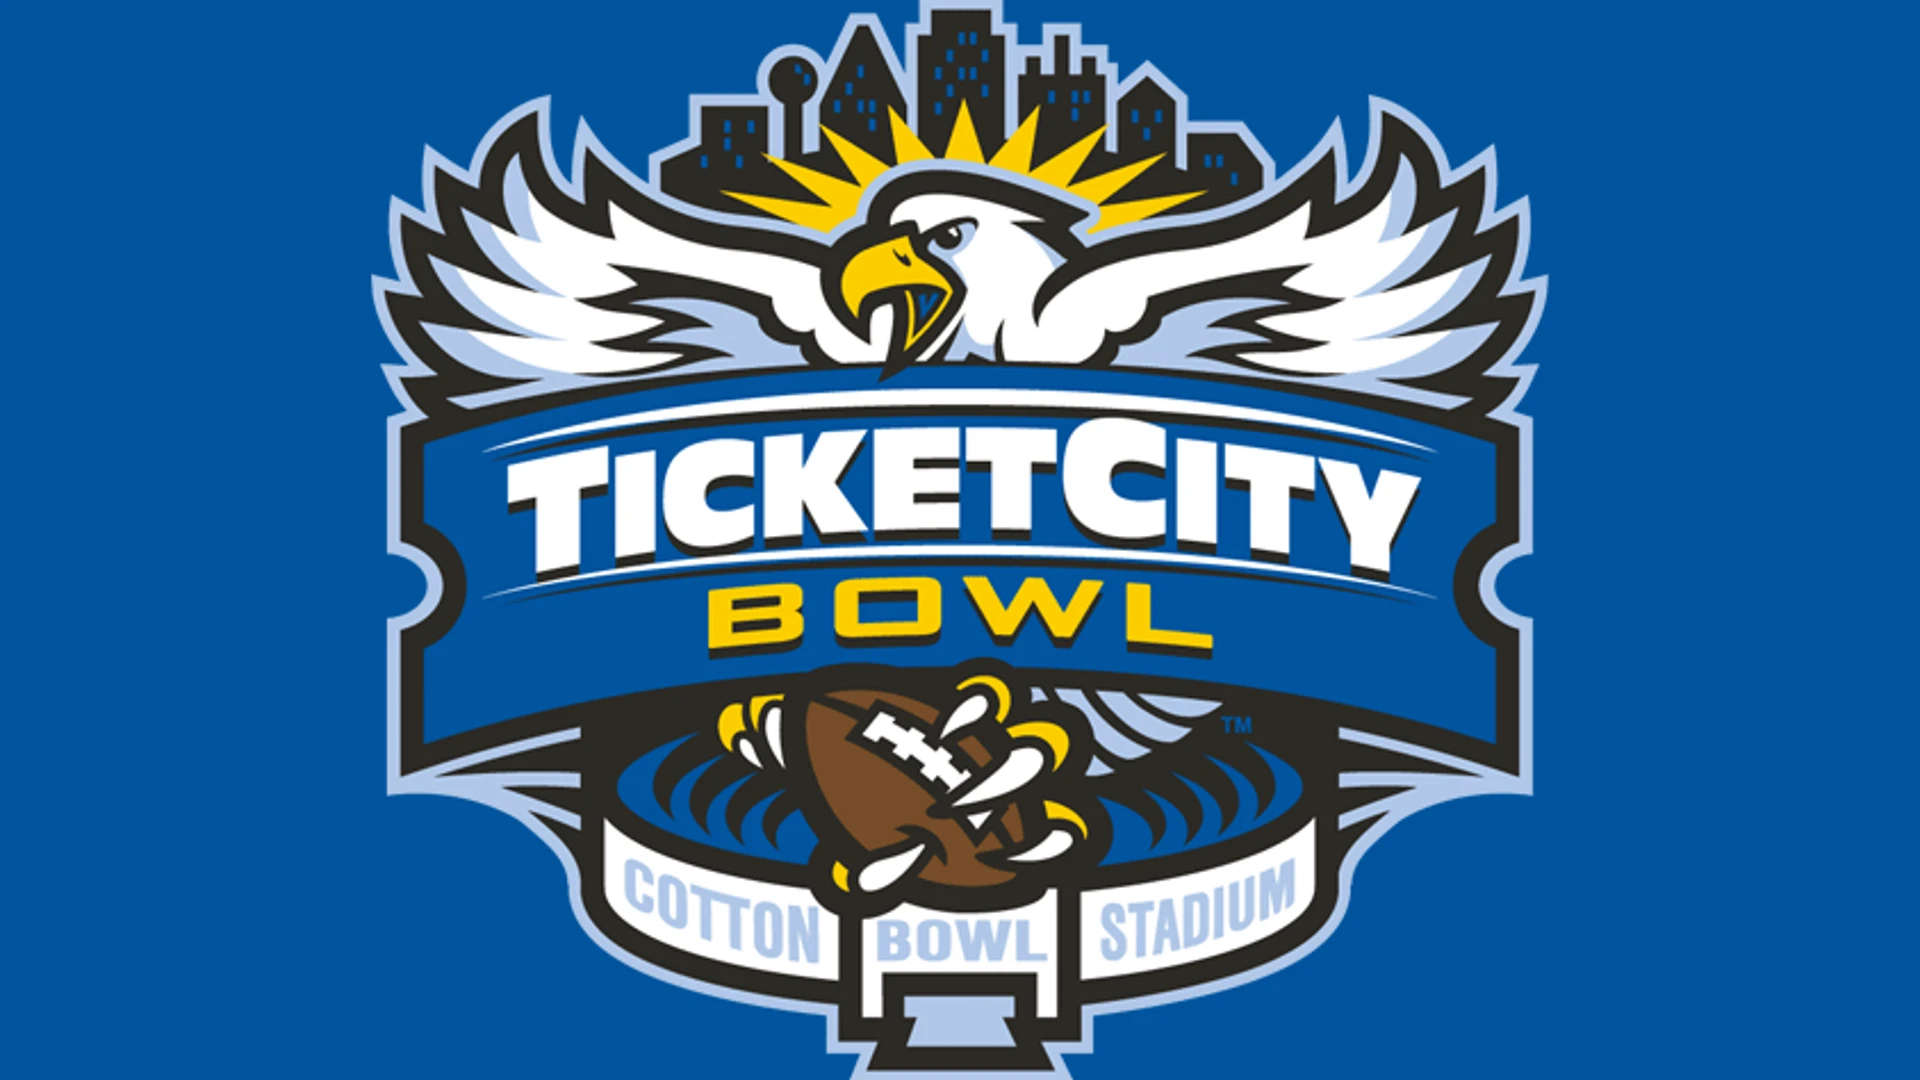 TicketCity Discout Codes